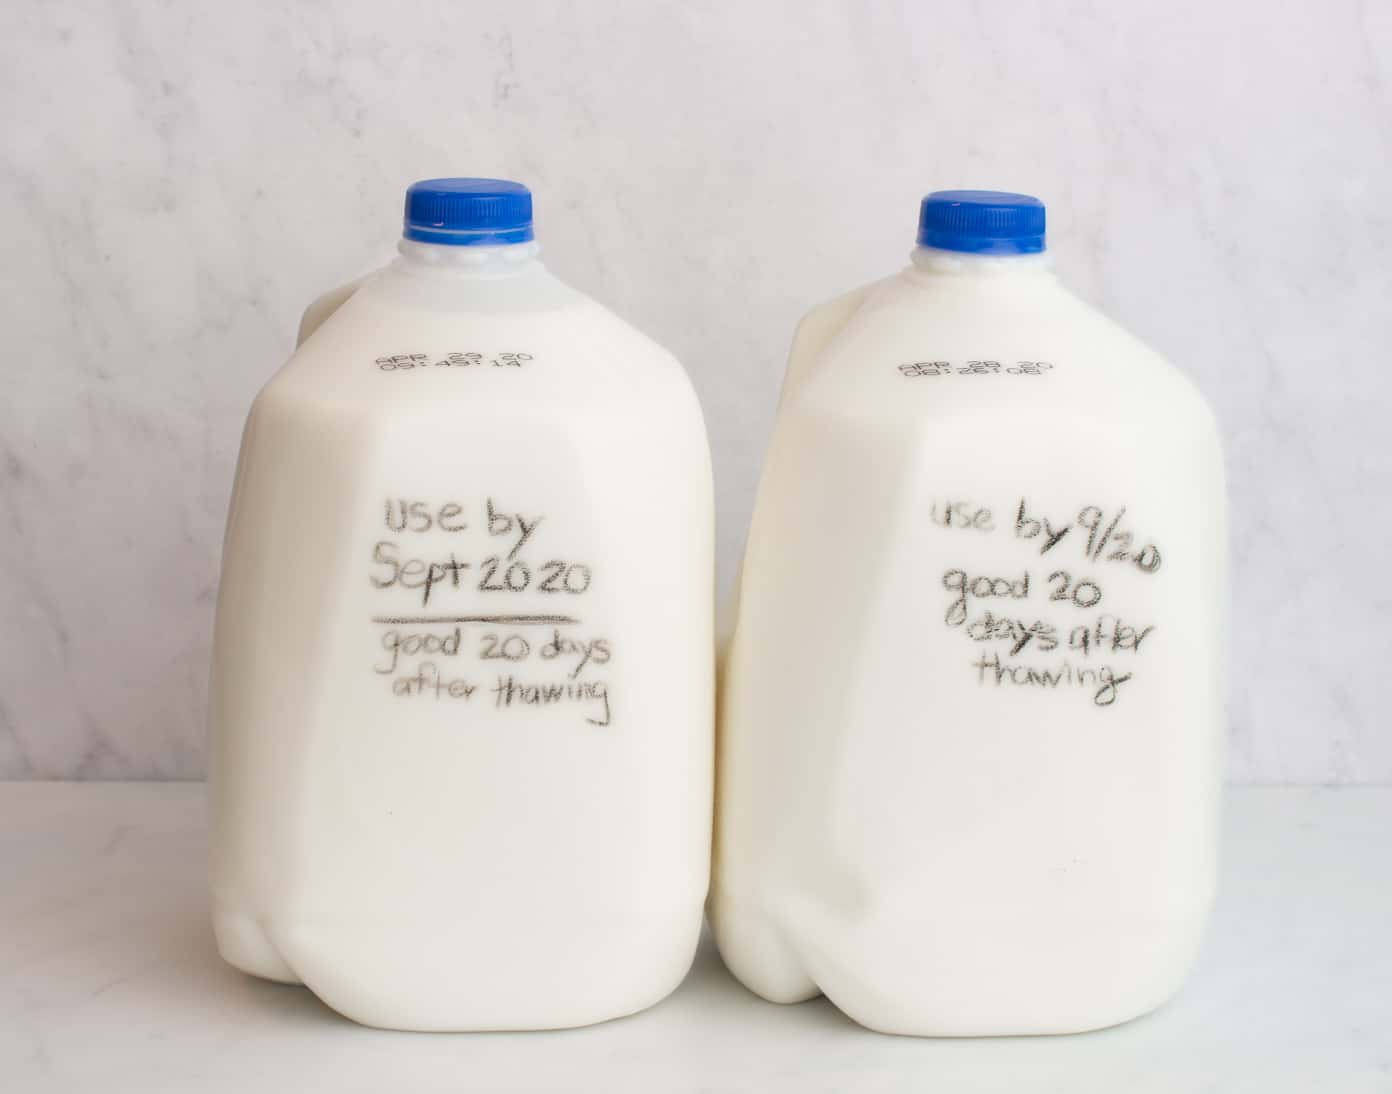 Two gallons of milk on a white counter. The first gallon of milk has the words written on it "use by  Sept 2020." Good for 20 days after thawing. The second has the words "use by 9/20 good for 20 days after thawing" written on it.